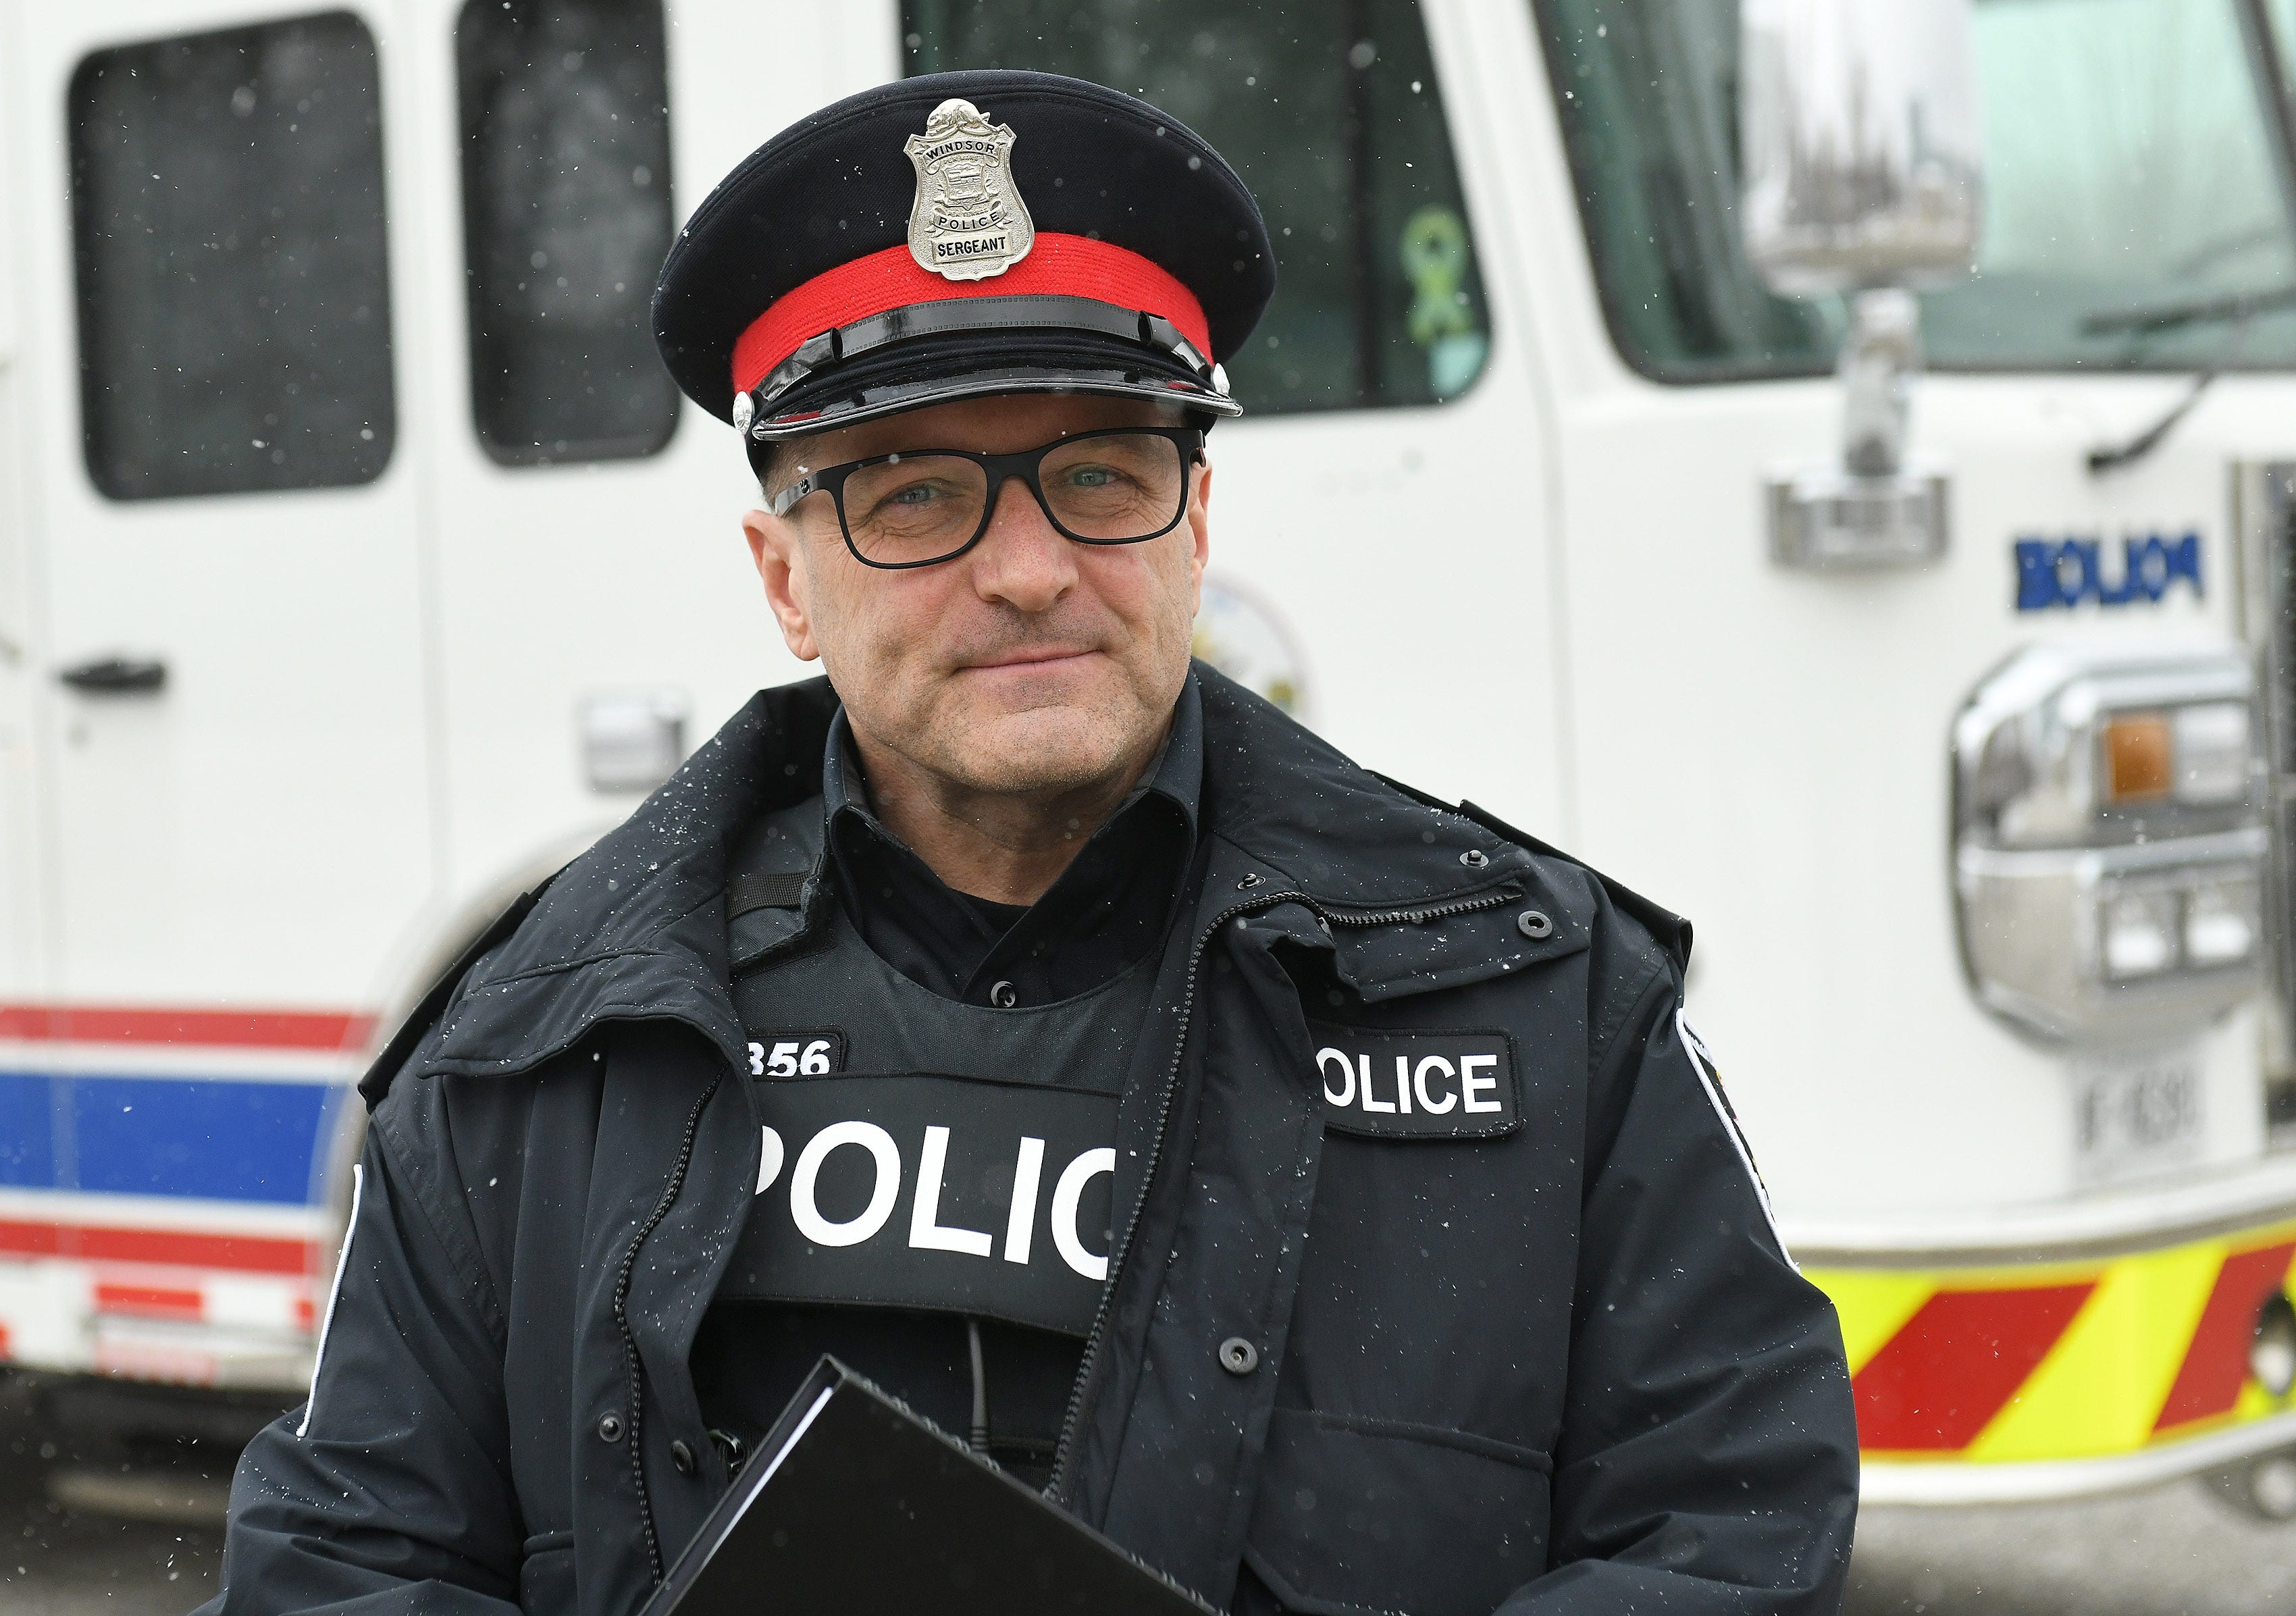 Windsor Police Sgt. Steve Betteridge talks about the arrests made with the criminal charge of mischief in the effort to reopen the Ambassador Bridge in Windsor, Ont. on Feb. 13, 2022.  
(Robin Buckson / The Detroit News)